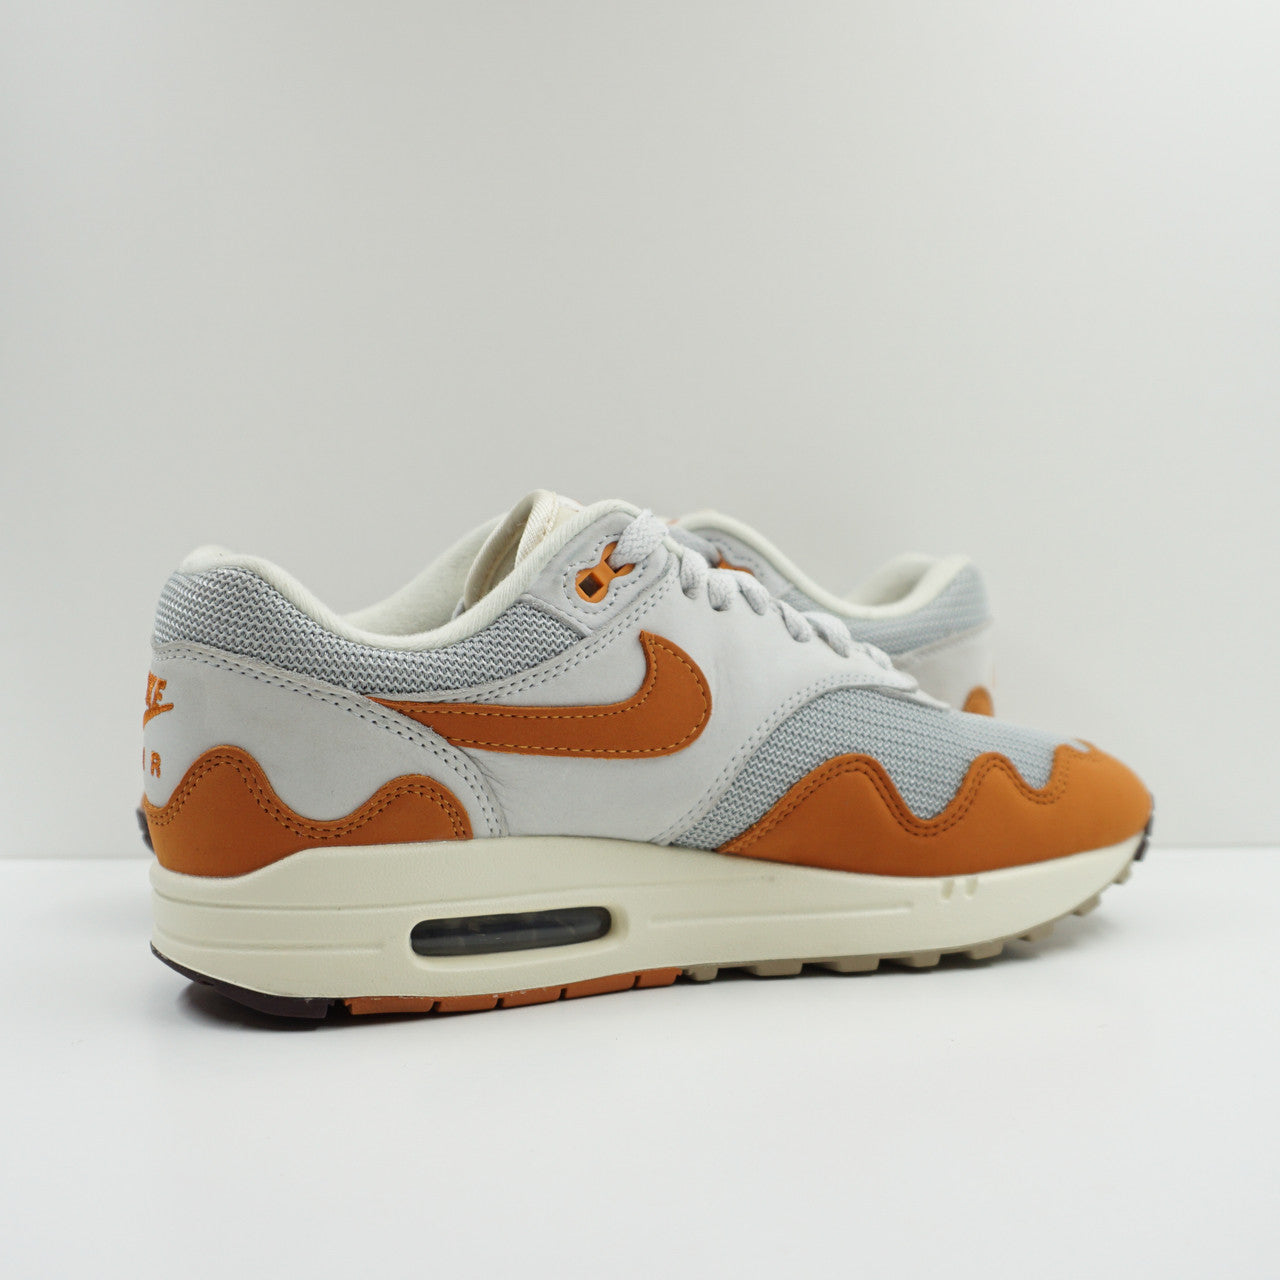 Nike Air Max 1 Patta Waves Monarch (without Bracelet)